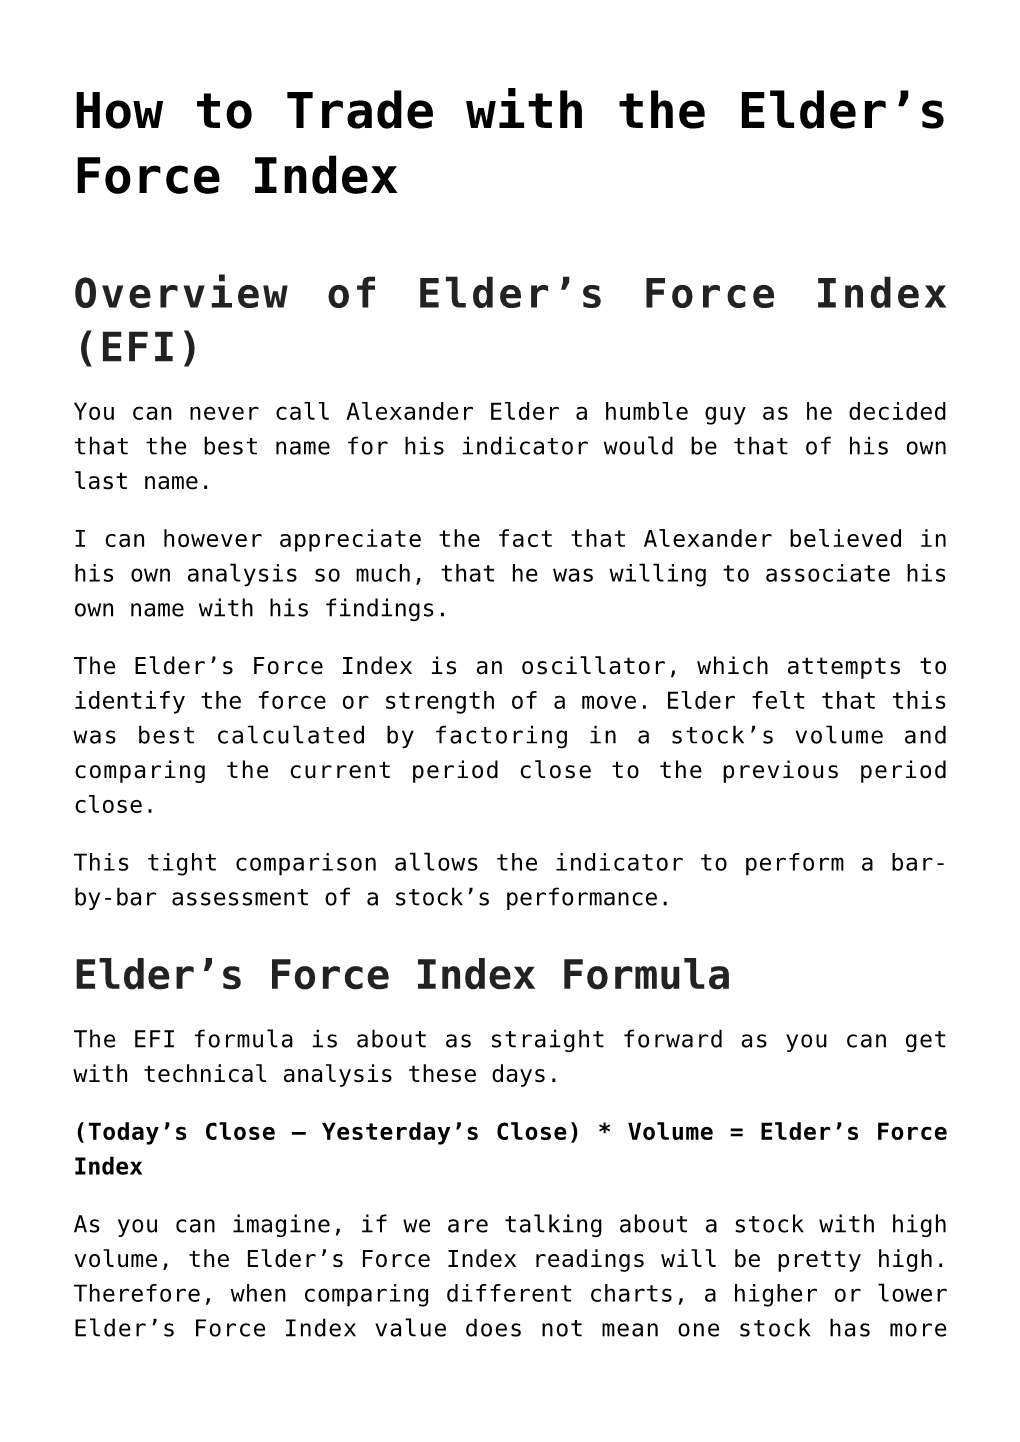 How to Trade with the Elder's Force Index